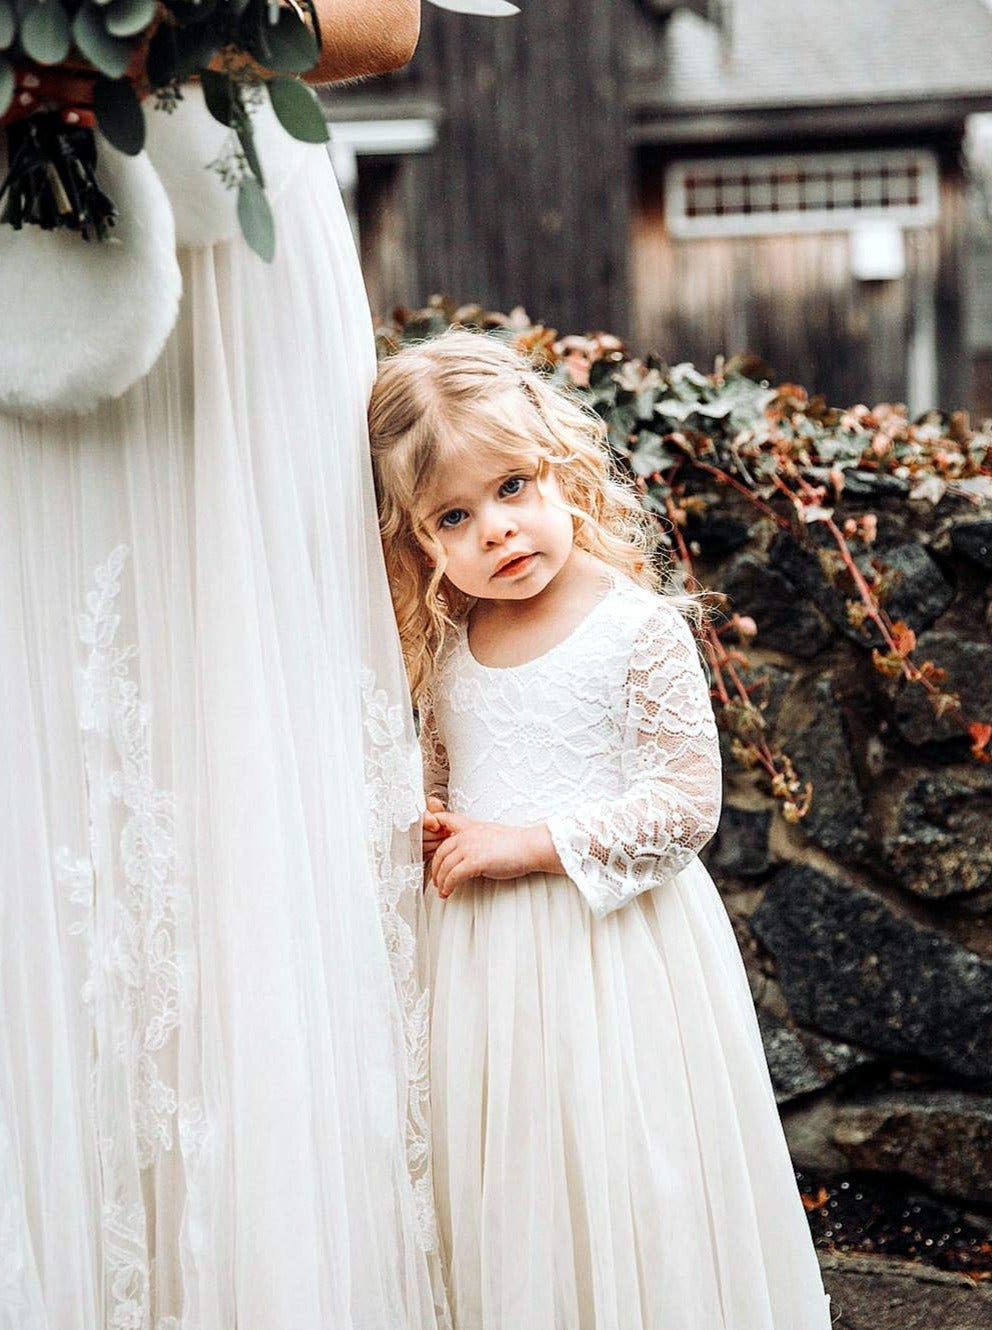 2Bunnies Flower Girl Dress Rose Lace Back A-Line Long Sleeve Straight Tulle Maxi (Ivory) - 2BUNNIES